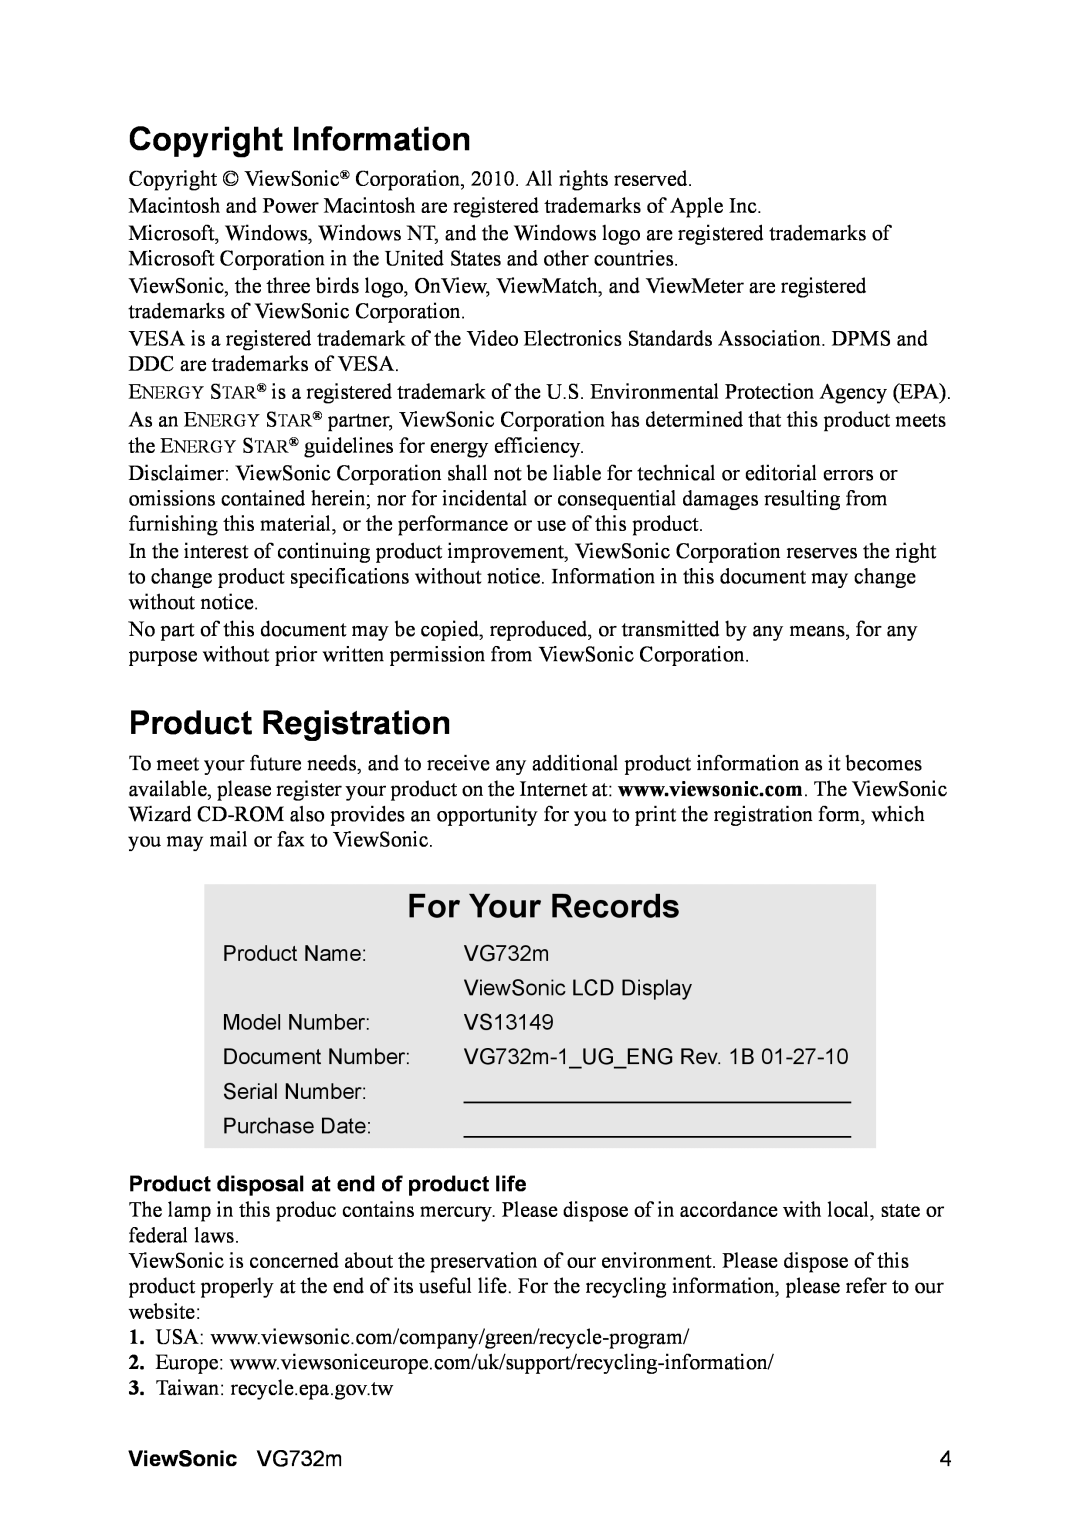 ViewSonic VG732M Copyright Information, Product Registration, For Your Records, Product disposal at end of product life 